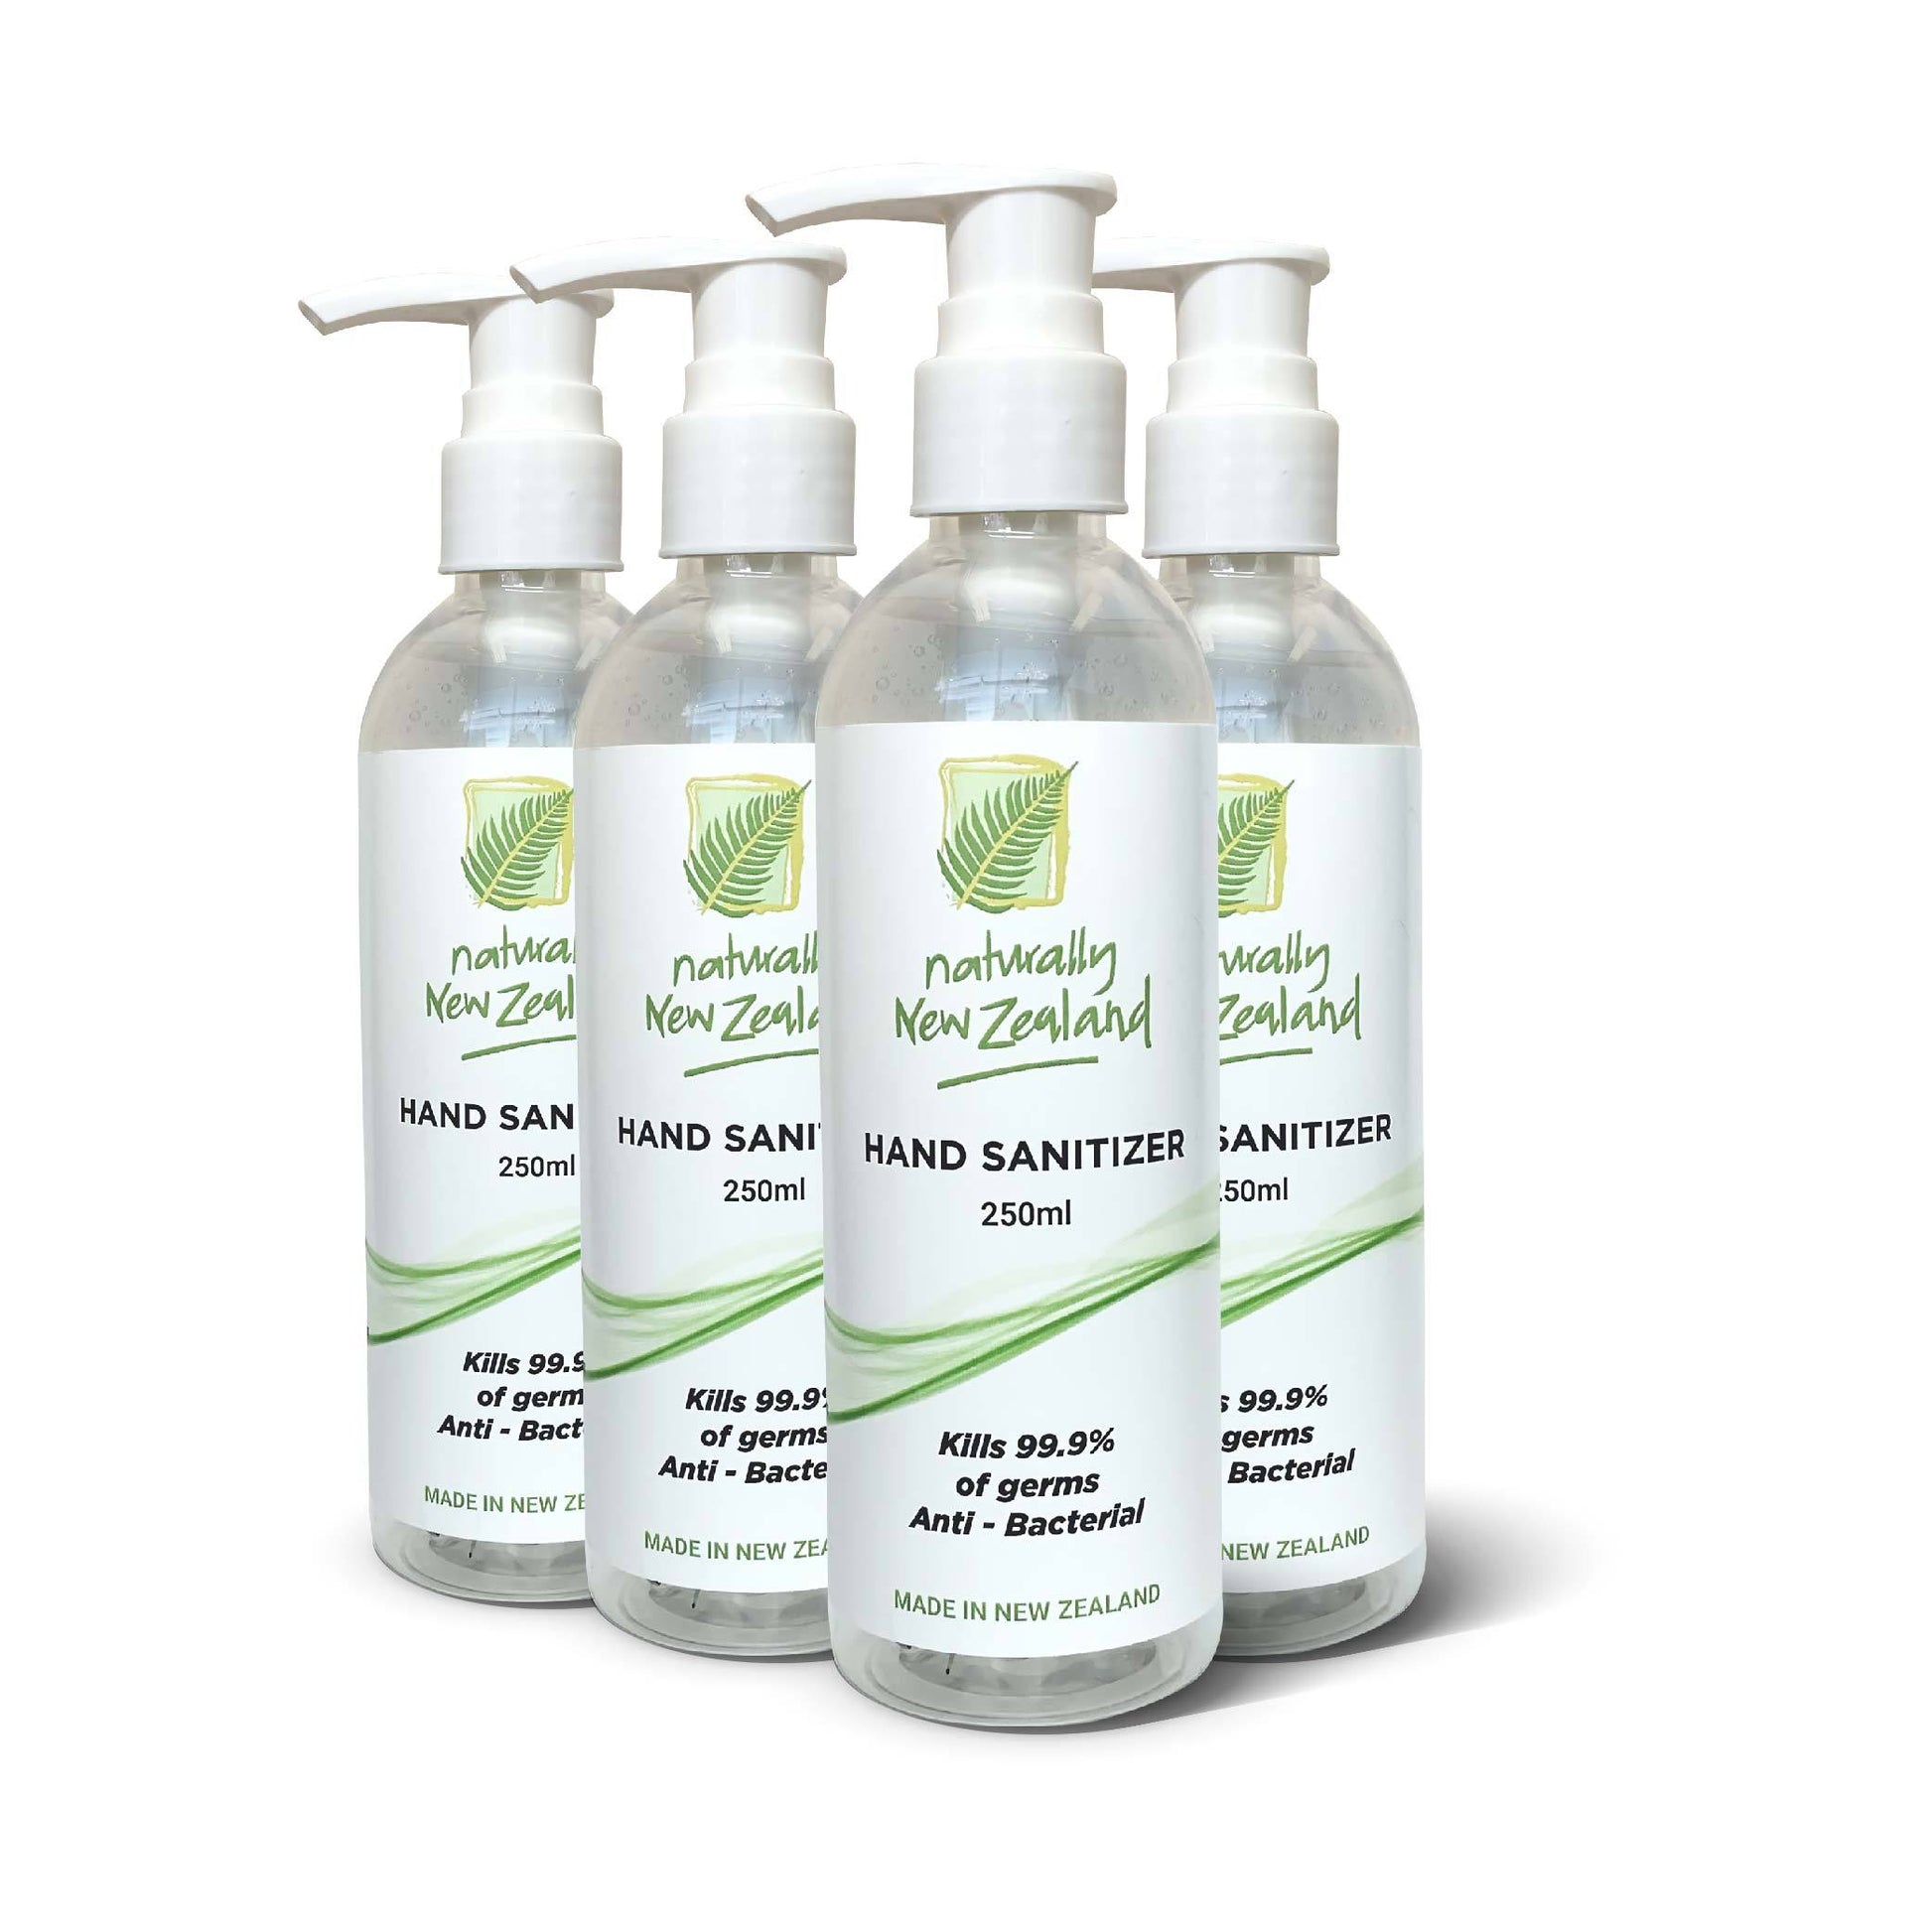 Naturally New Zealand Beauty - Body Care 4 PK Hand Sanitizer - Naturally New Zealand  250ml - North Island Delivery (excl. Auckland)